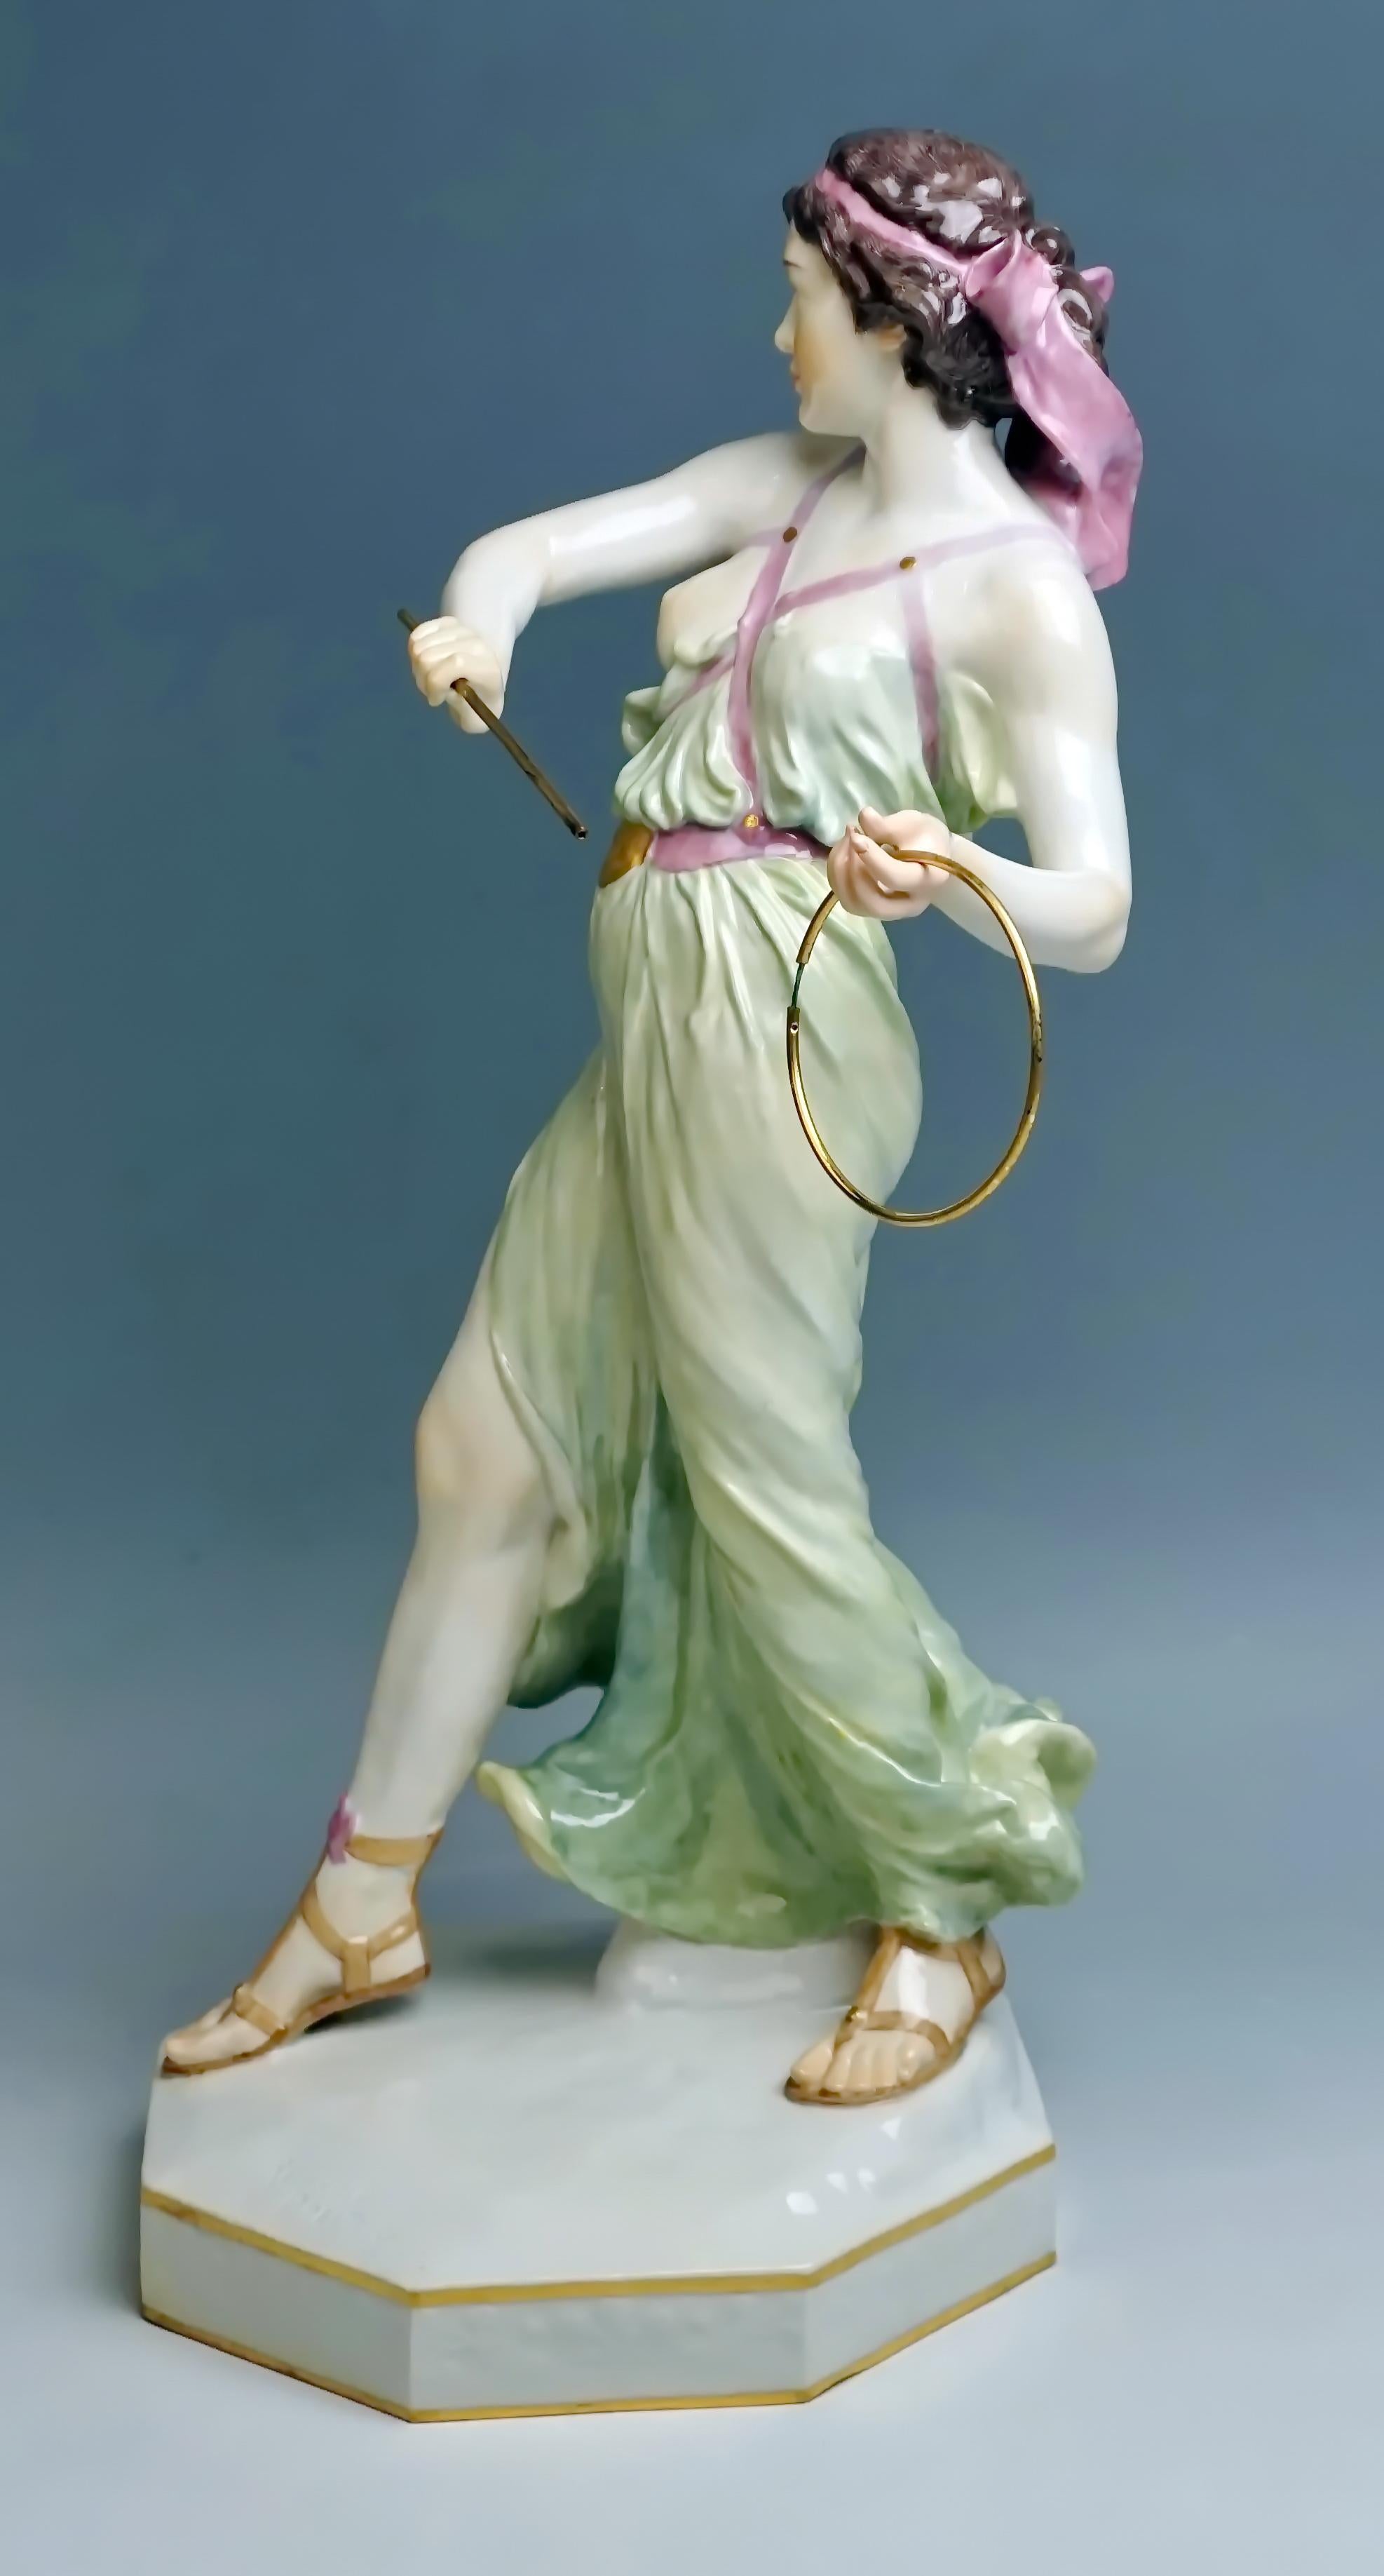 Superb Meissen Art Nouveau Figurine

Manufactory: Meissen 
Dating: made circa 1909
Marked: Meissen swords mark of early 20th century / first quality
Model number A 235 / former's number 148 / painter's number 68 
Material: multicolored